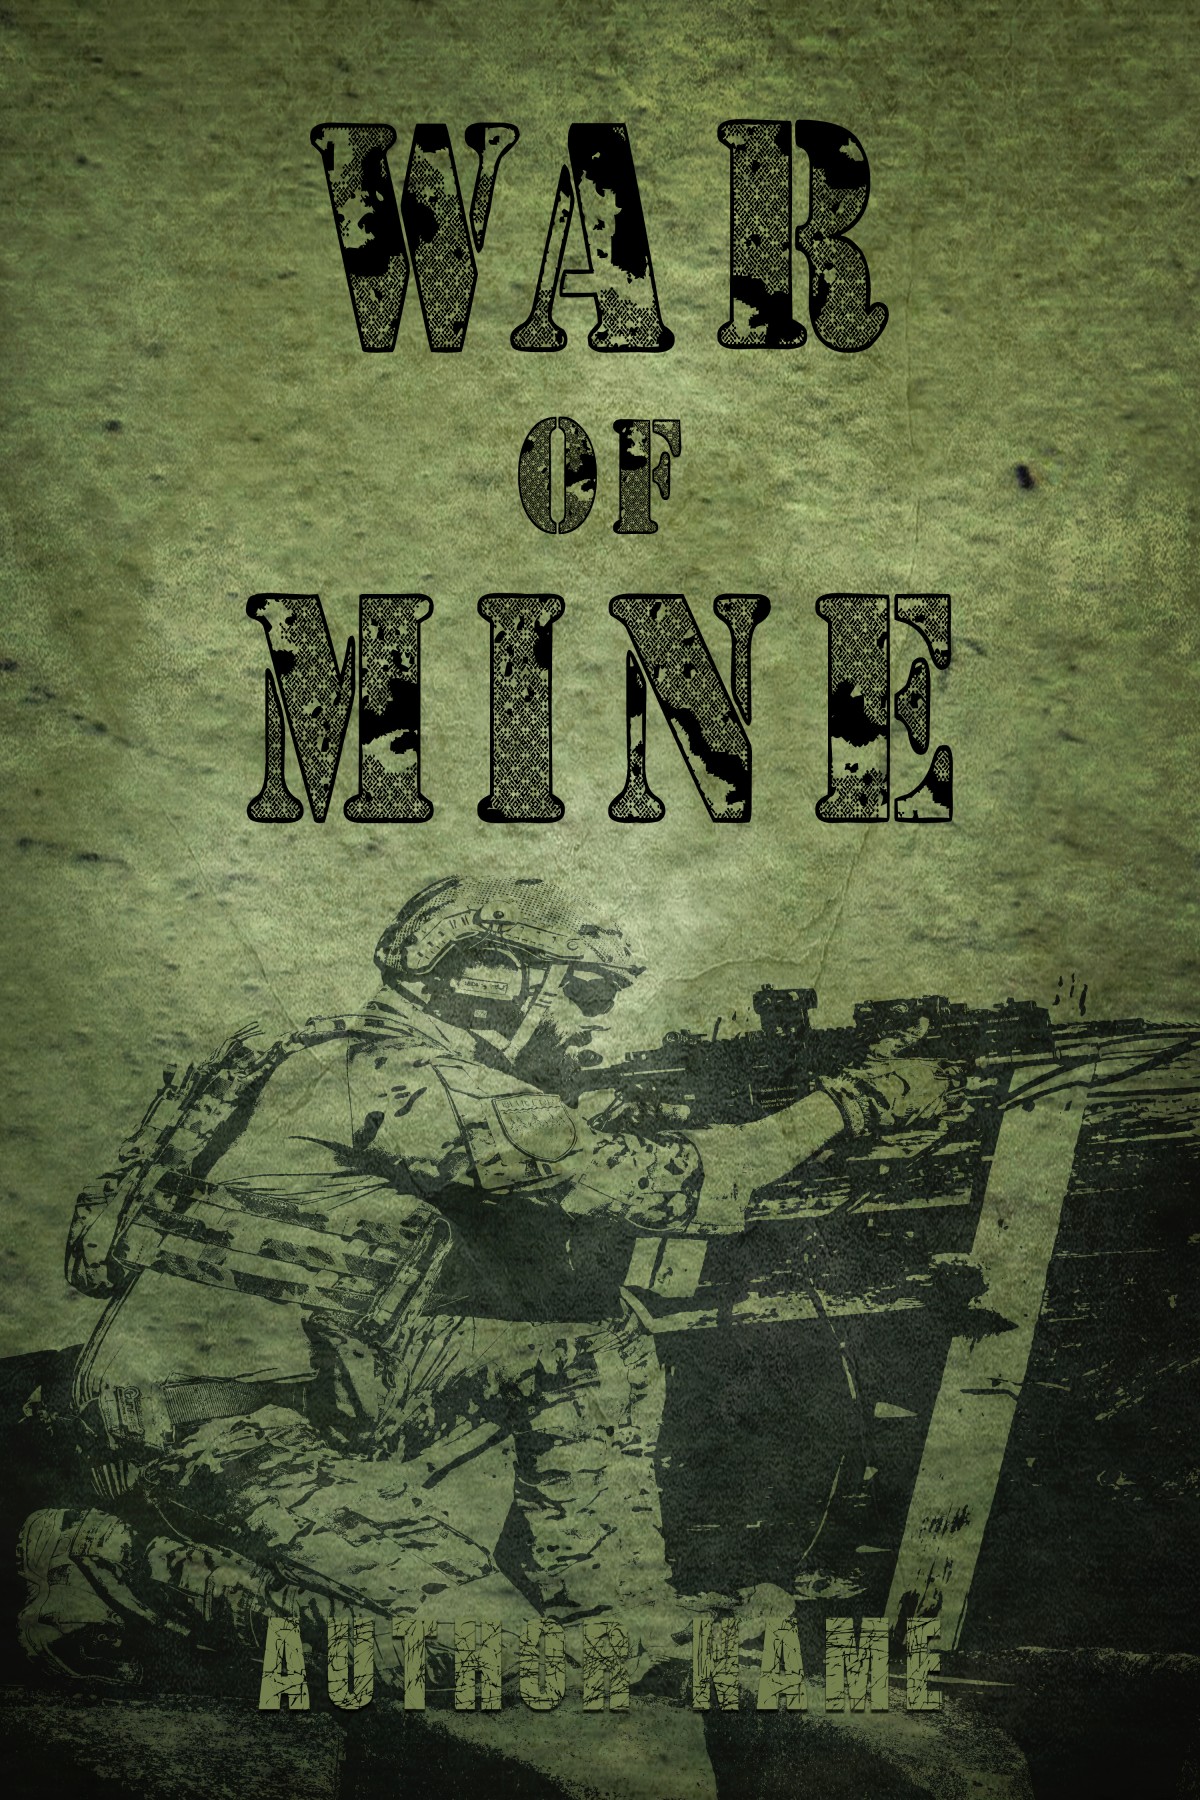 free download this war of mine